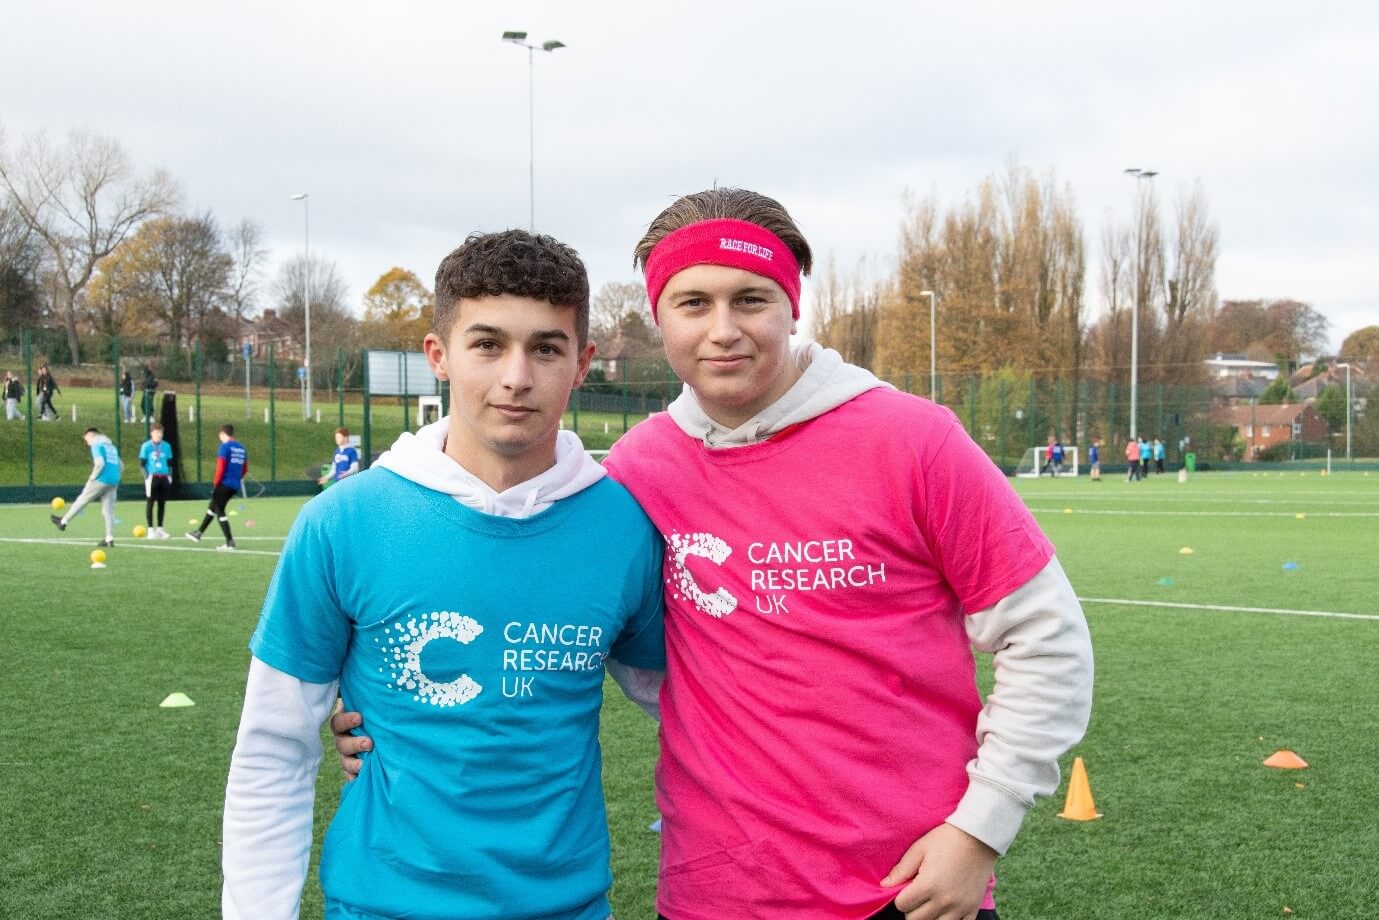 Trinity Academy pupils raise money for Cancer Research.